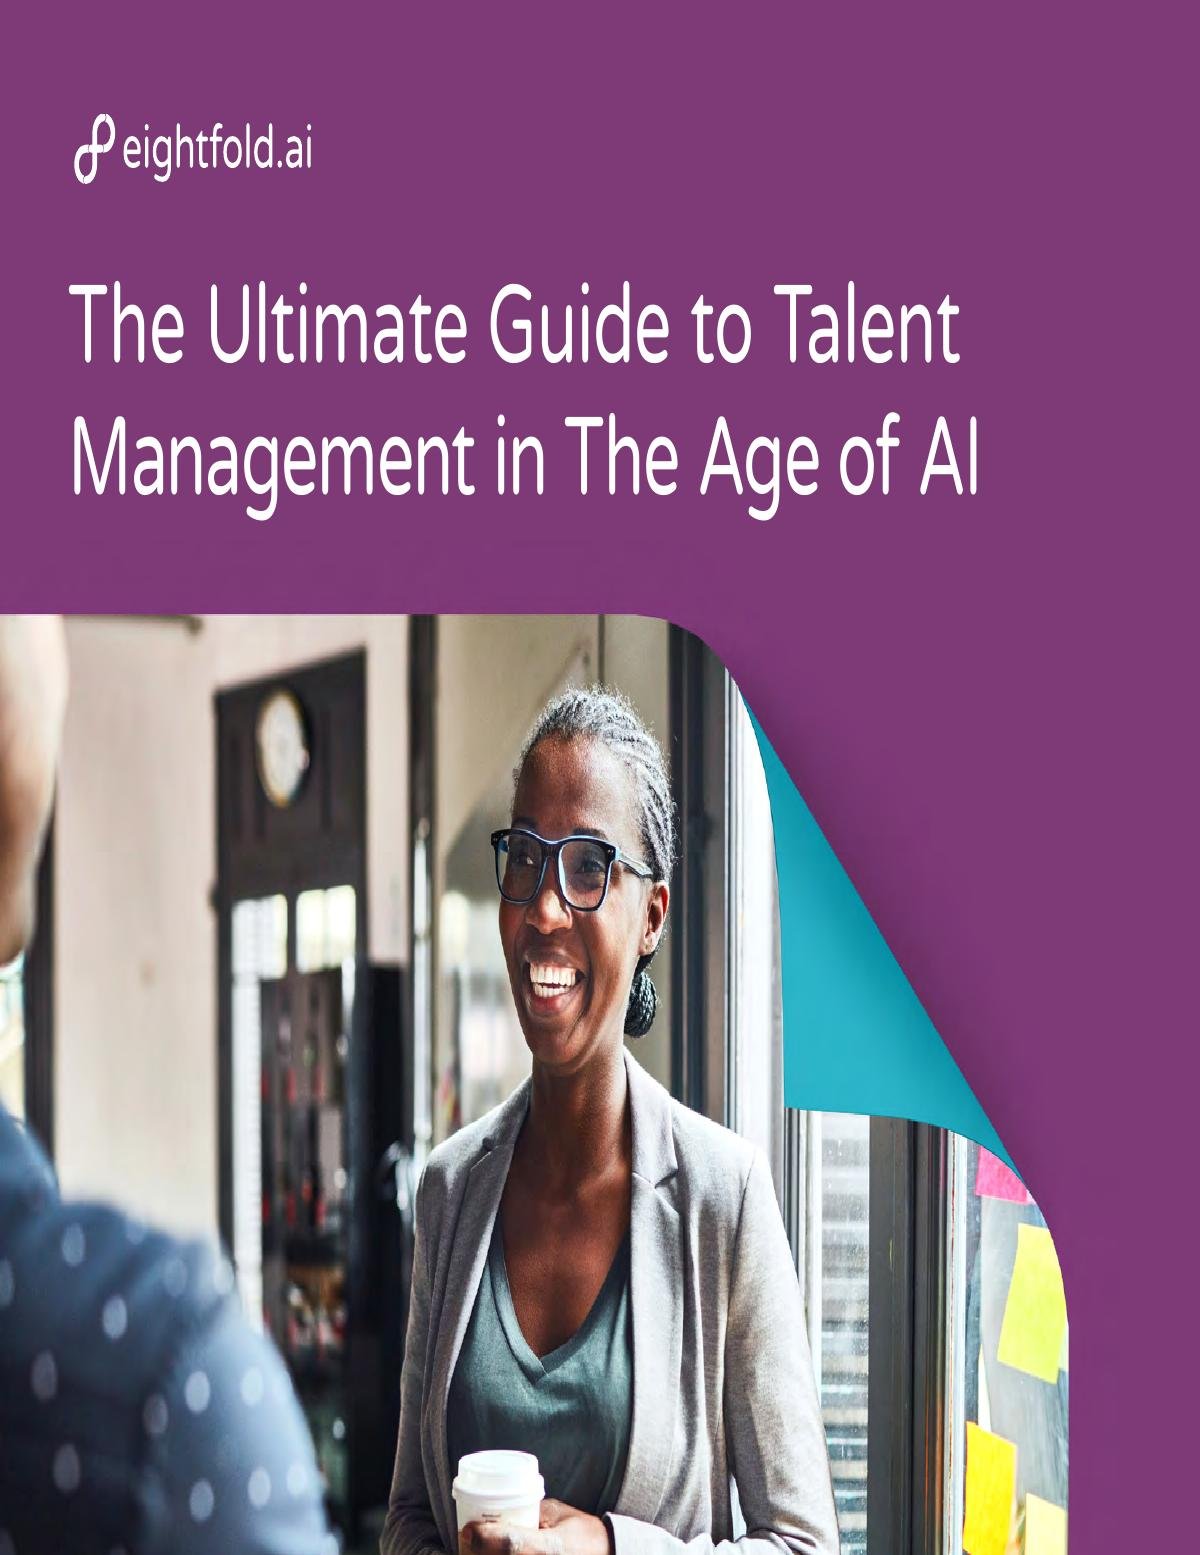 The Ultimate Guide To Talent Management in The Age of AI